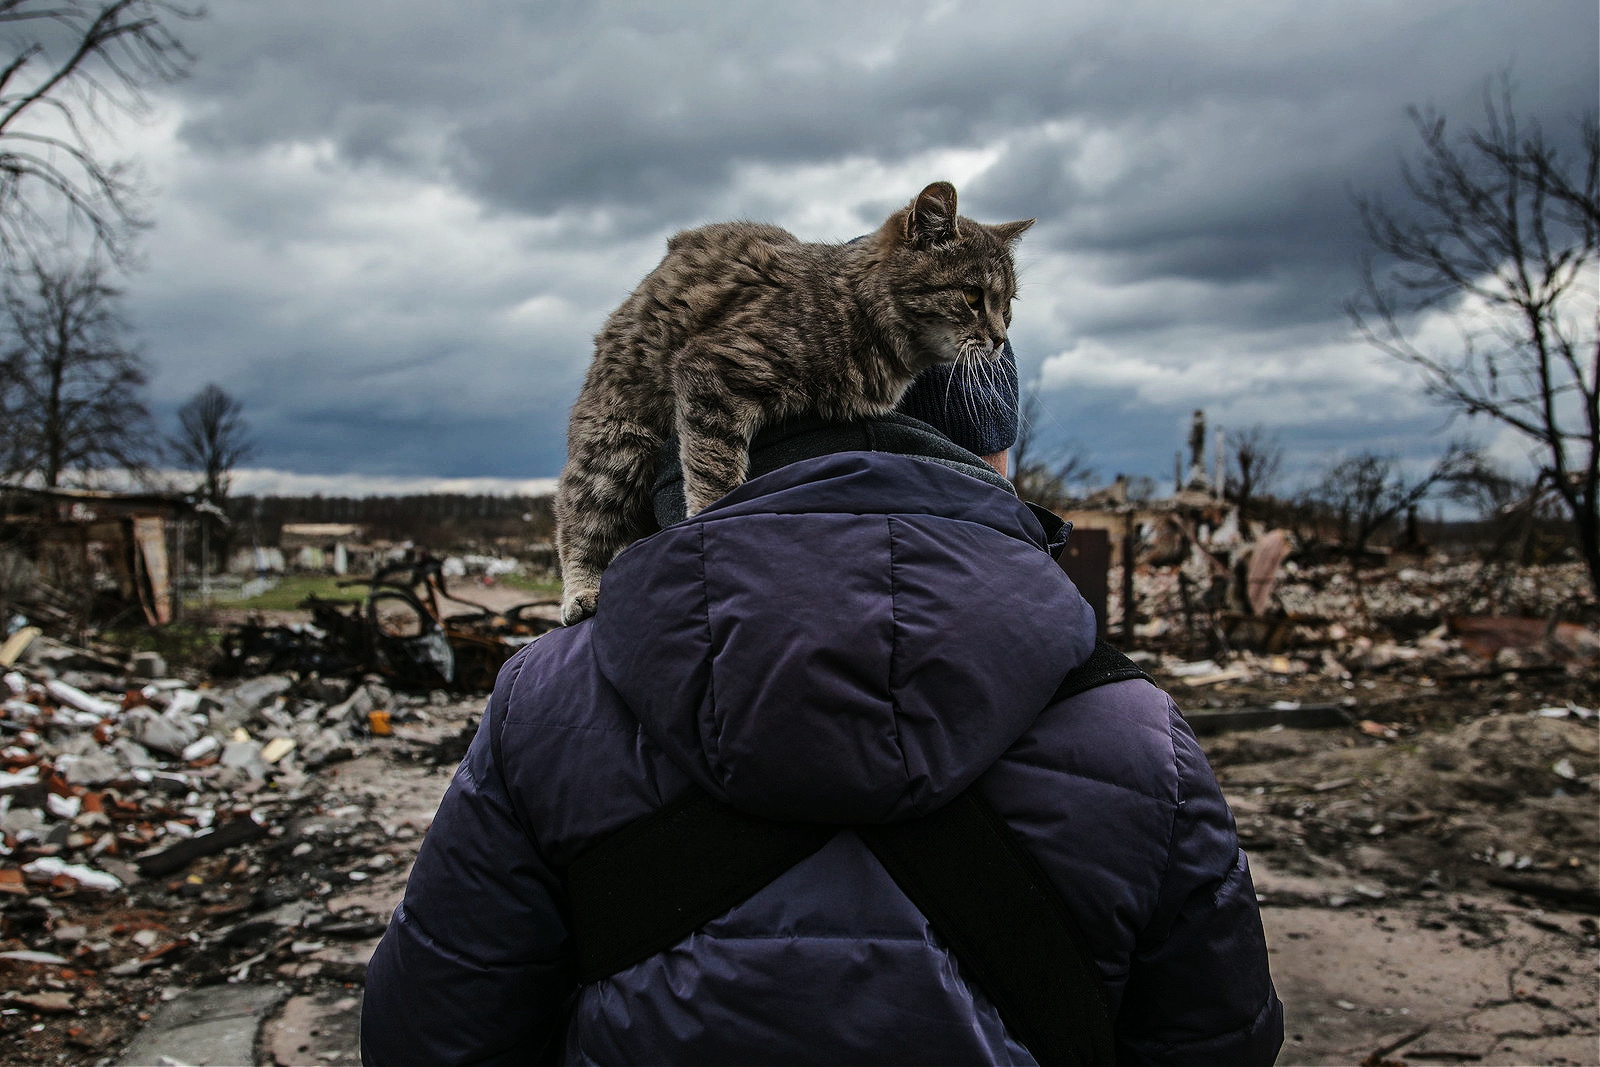 Ukrainians surveying their destroyed home